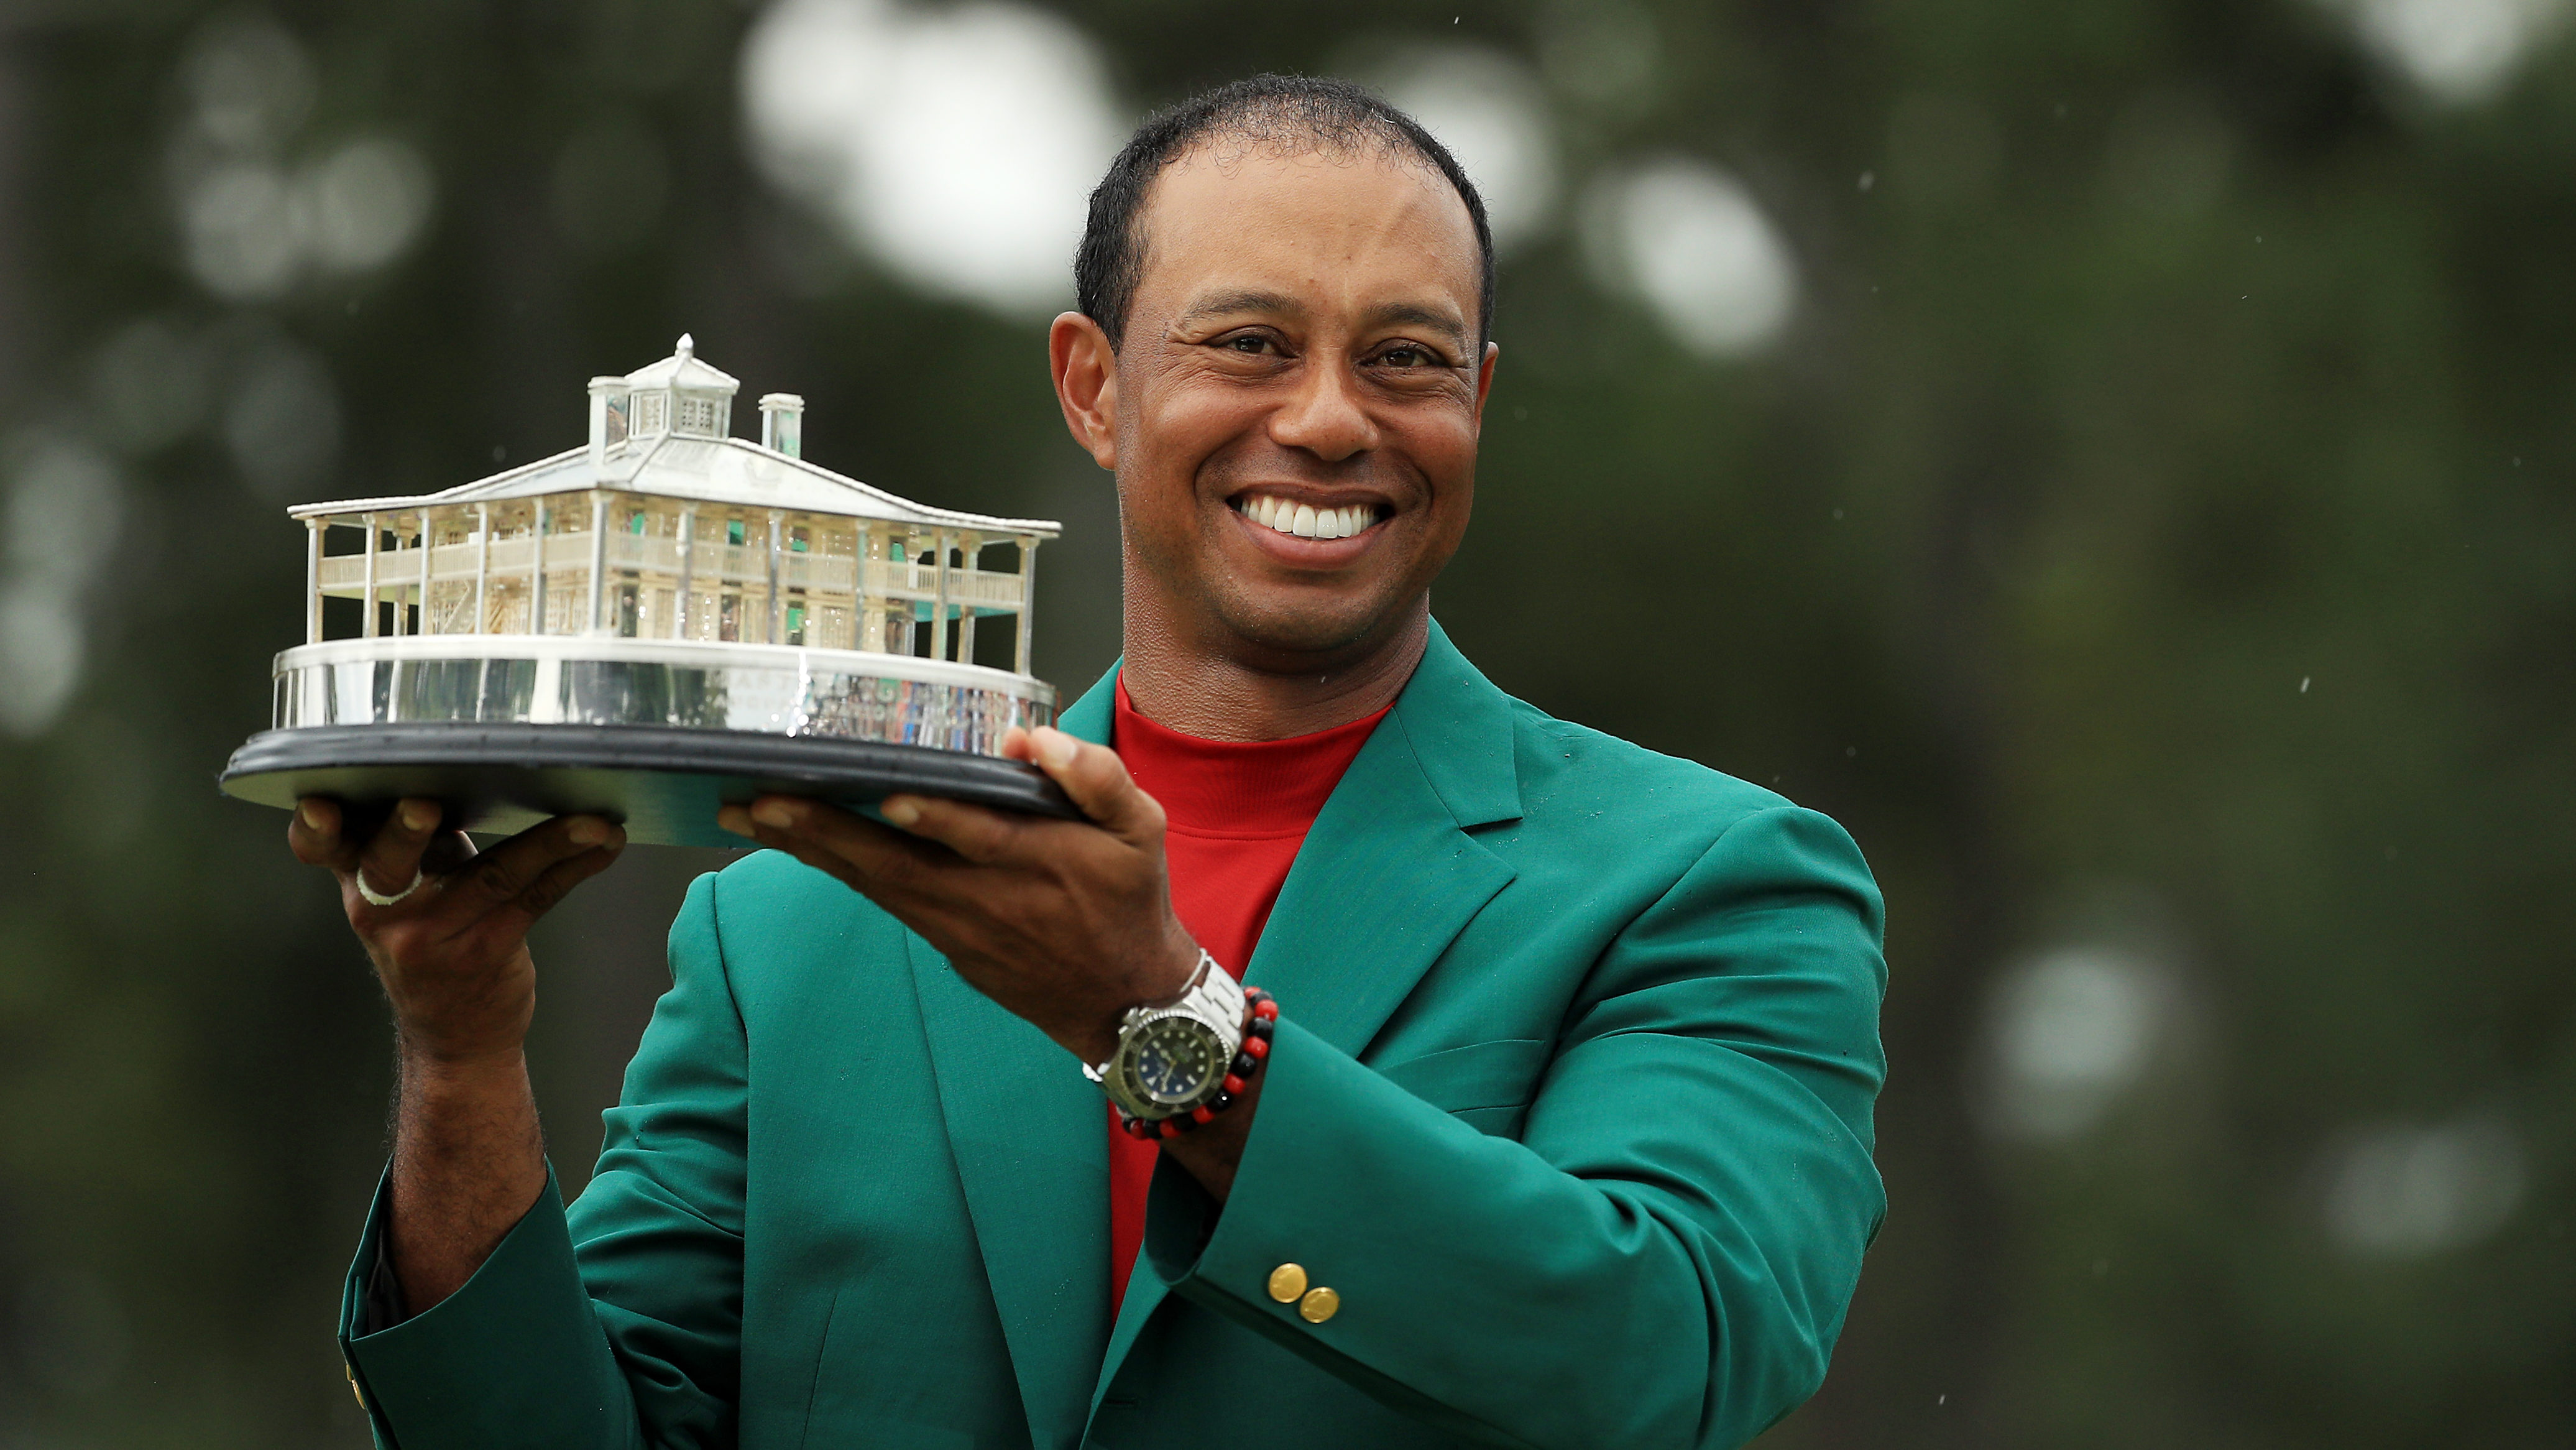 Black folks rally around Tiger Woods' Masters win and keep it real